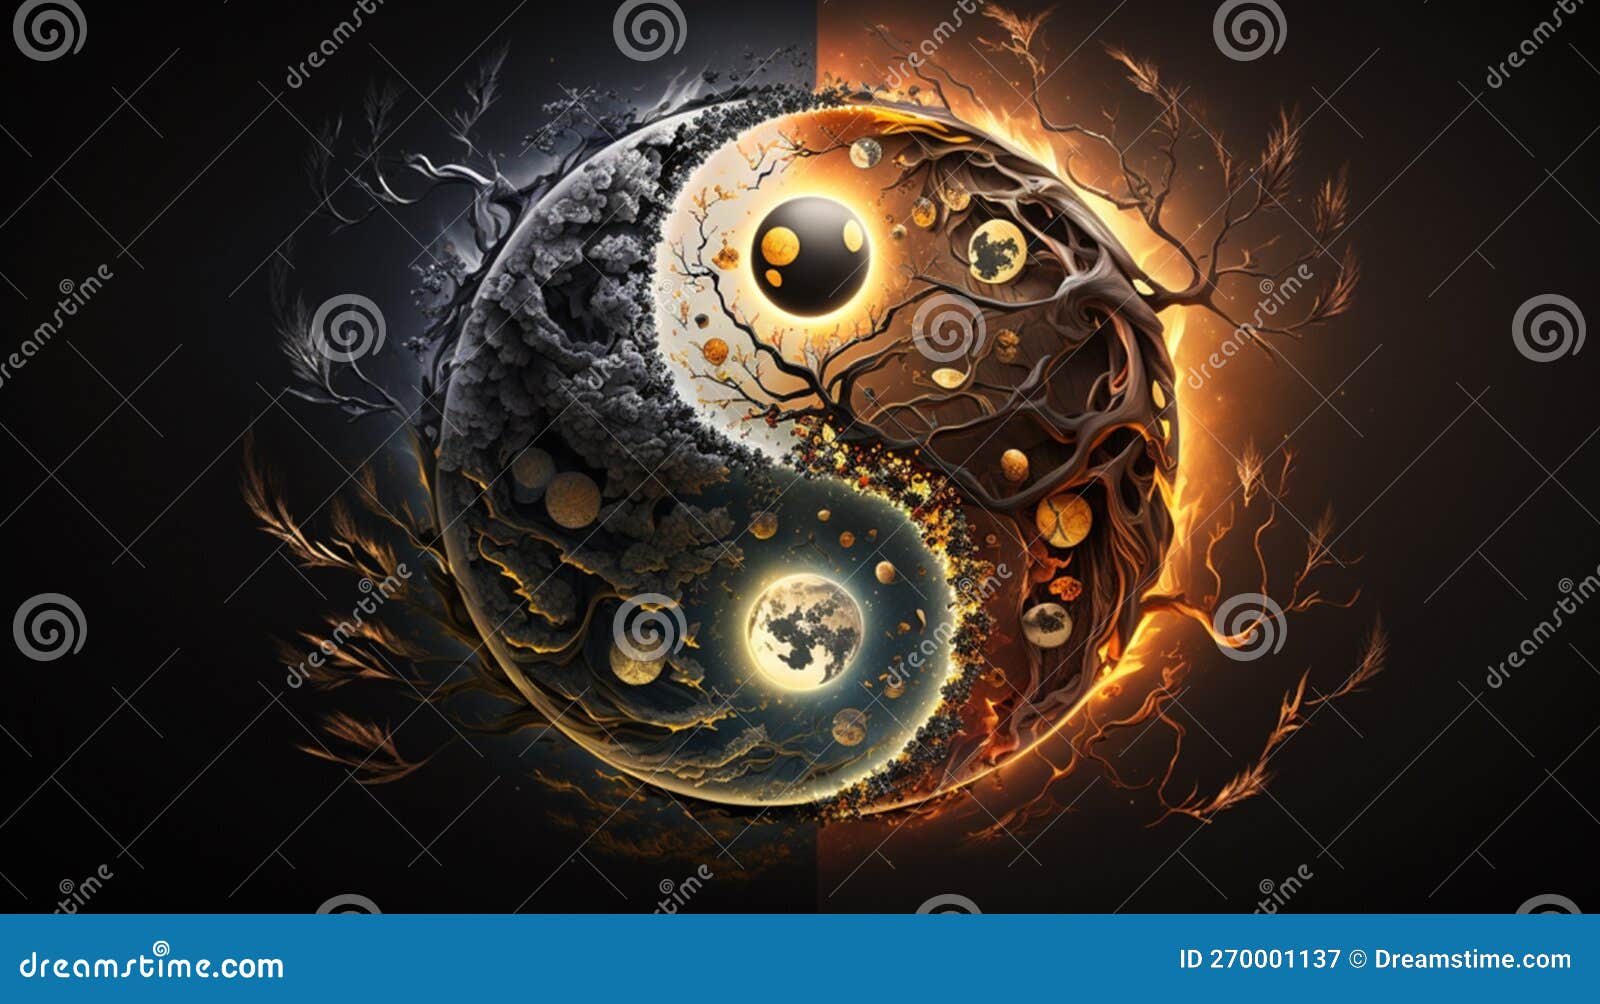 https://thumbs.dreamstime.com/z/yin-yang-wallpaper-yin-yang-wallpaper-usually-depicts-concept-duality-balance-typically-features-circular-symbol-270001137.jpg